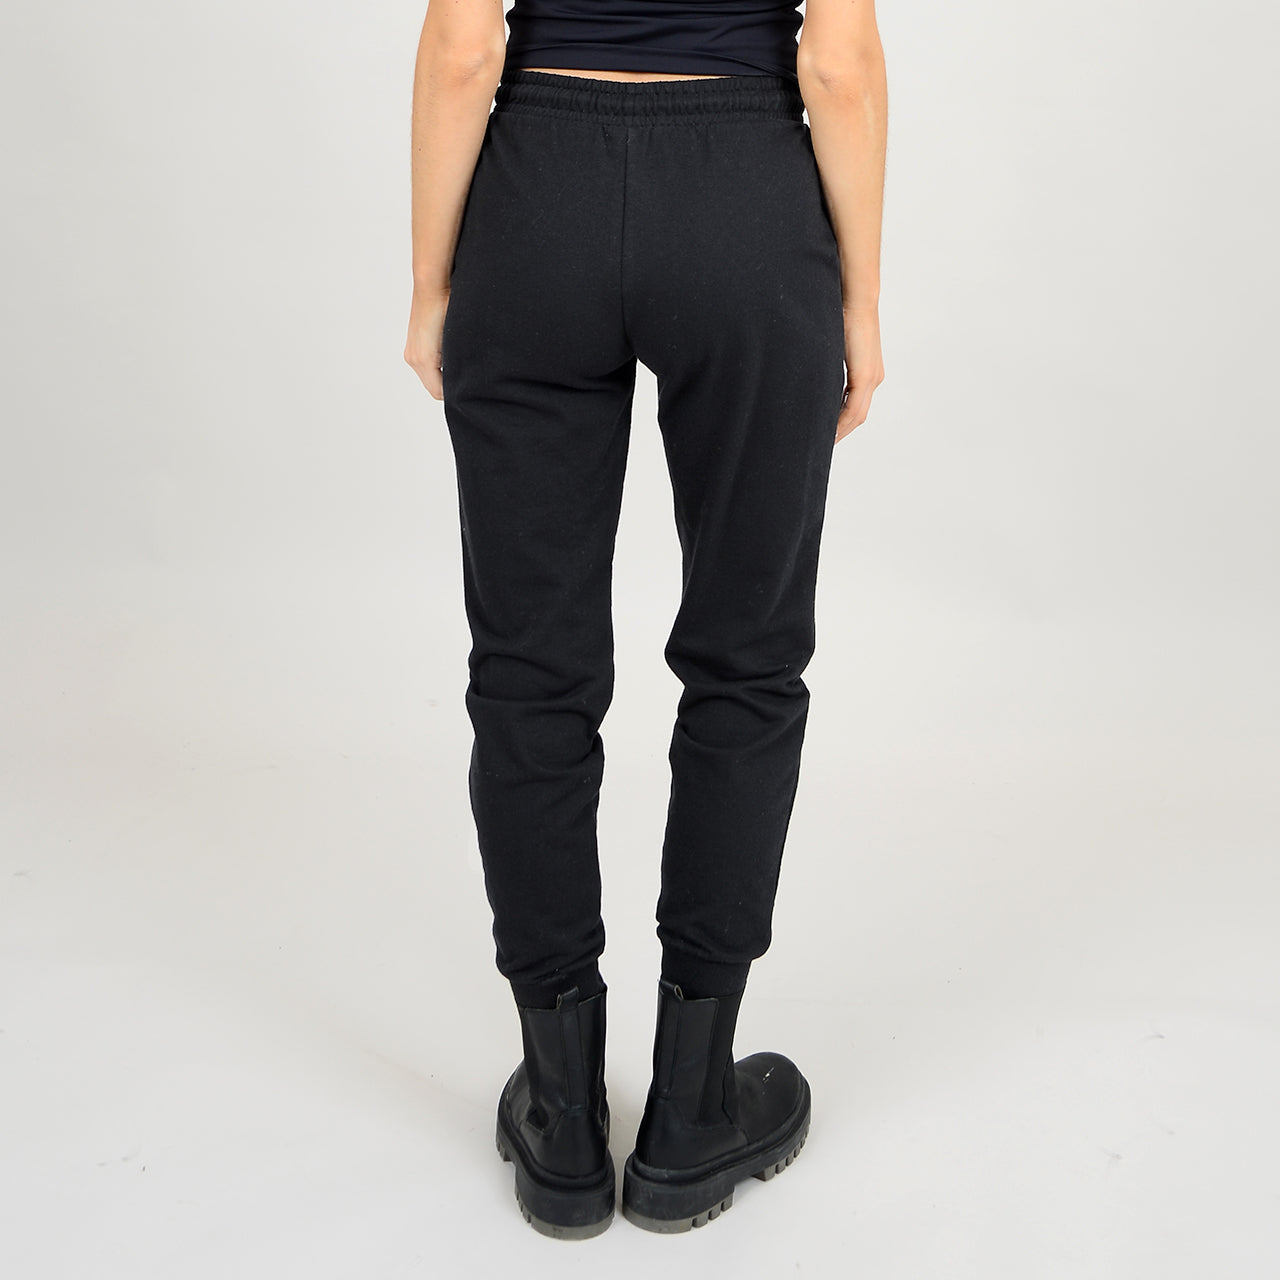 Fitted Fleece Jogger Pant - RD Style